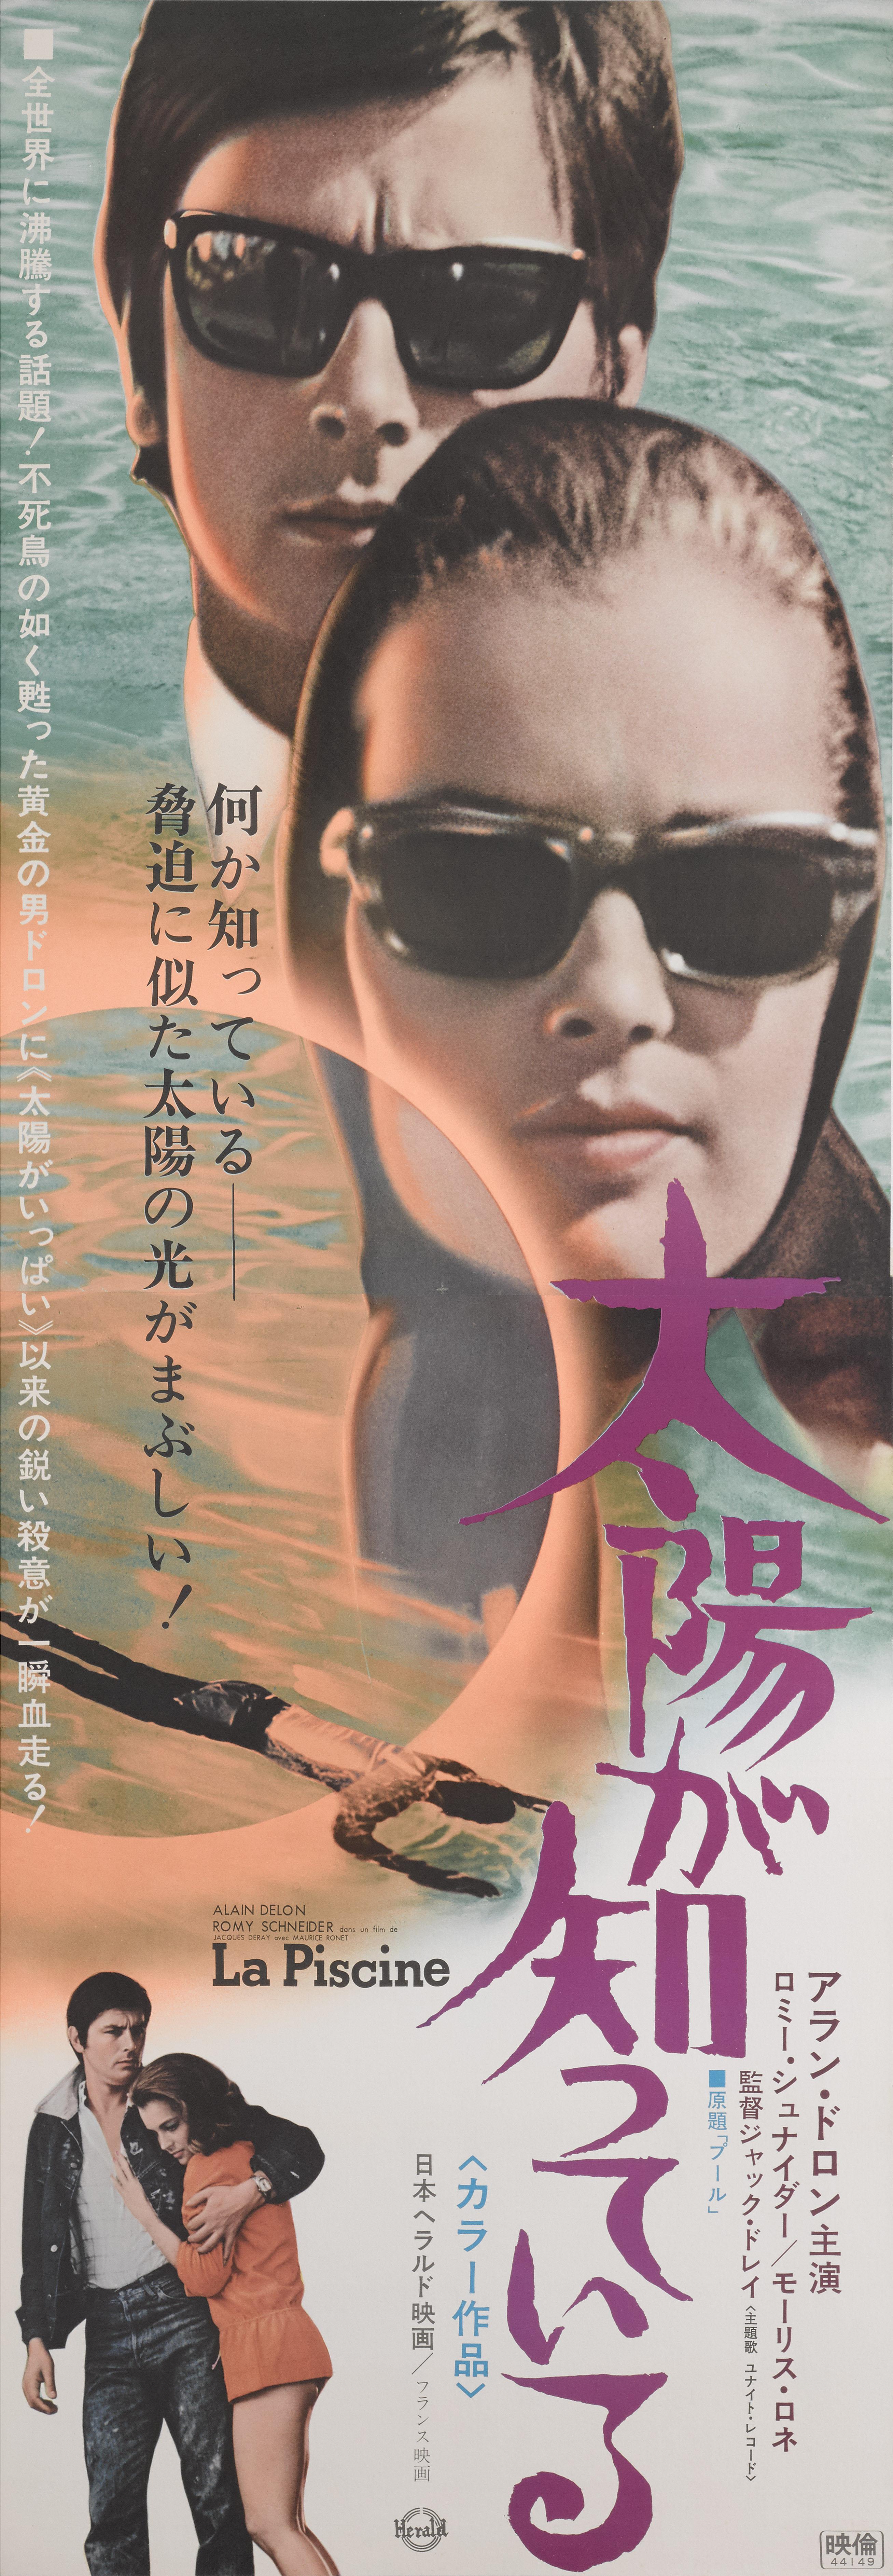 Original Japanese film poster for the 1969 drama, romance La Piscine / The swimming pool.
This cool art work was designed for the first Japanese release of the film.
The film starred Alain Delon and Romy Schneider and was directed by Jacques